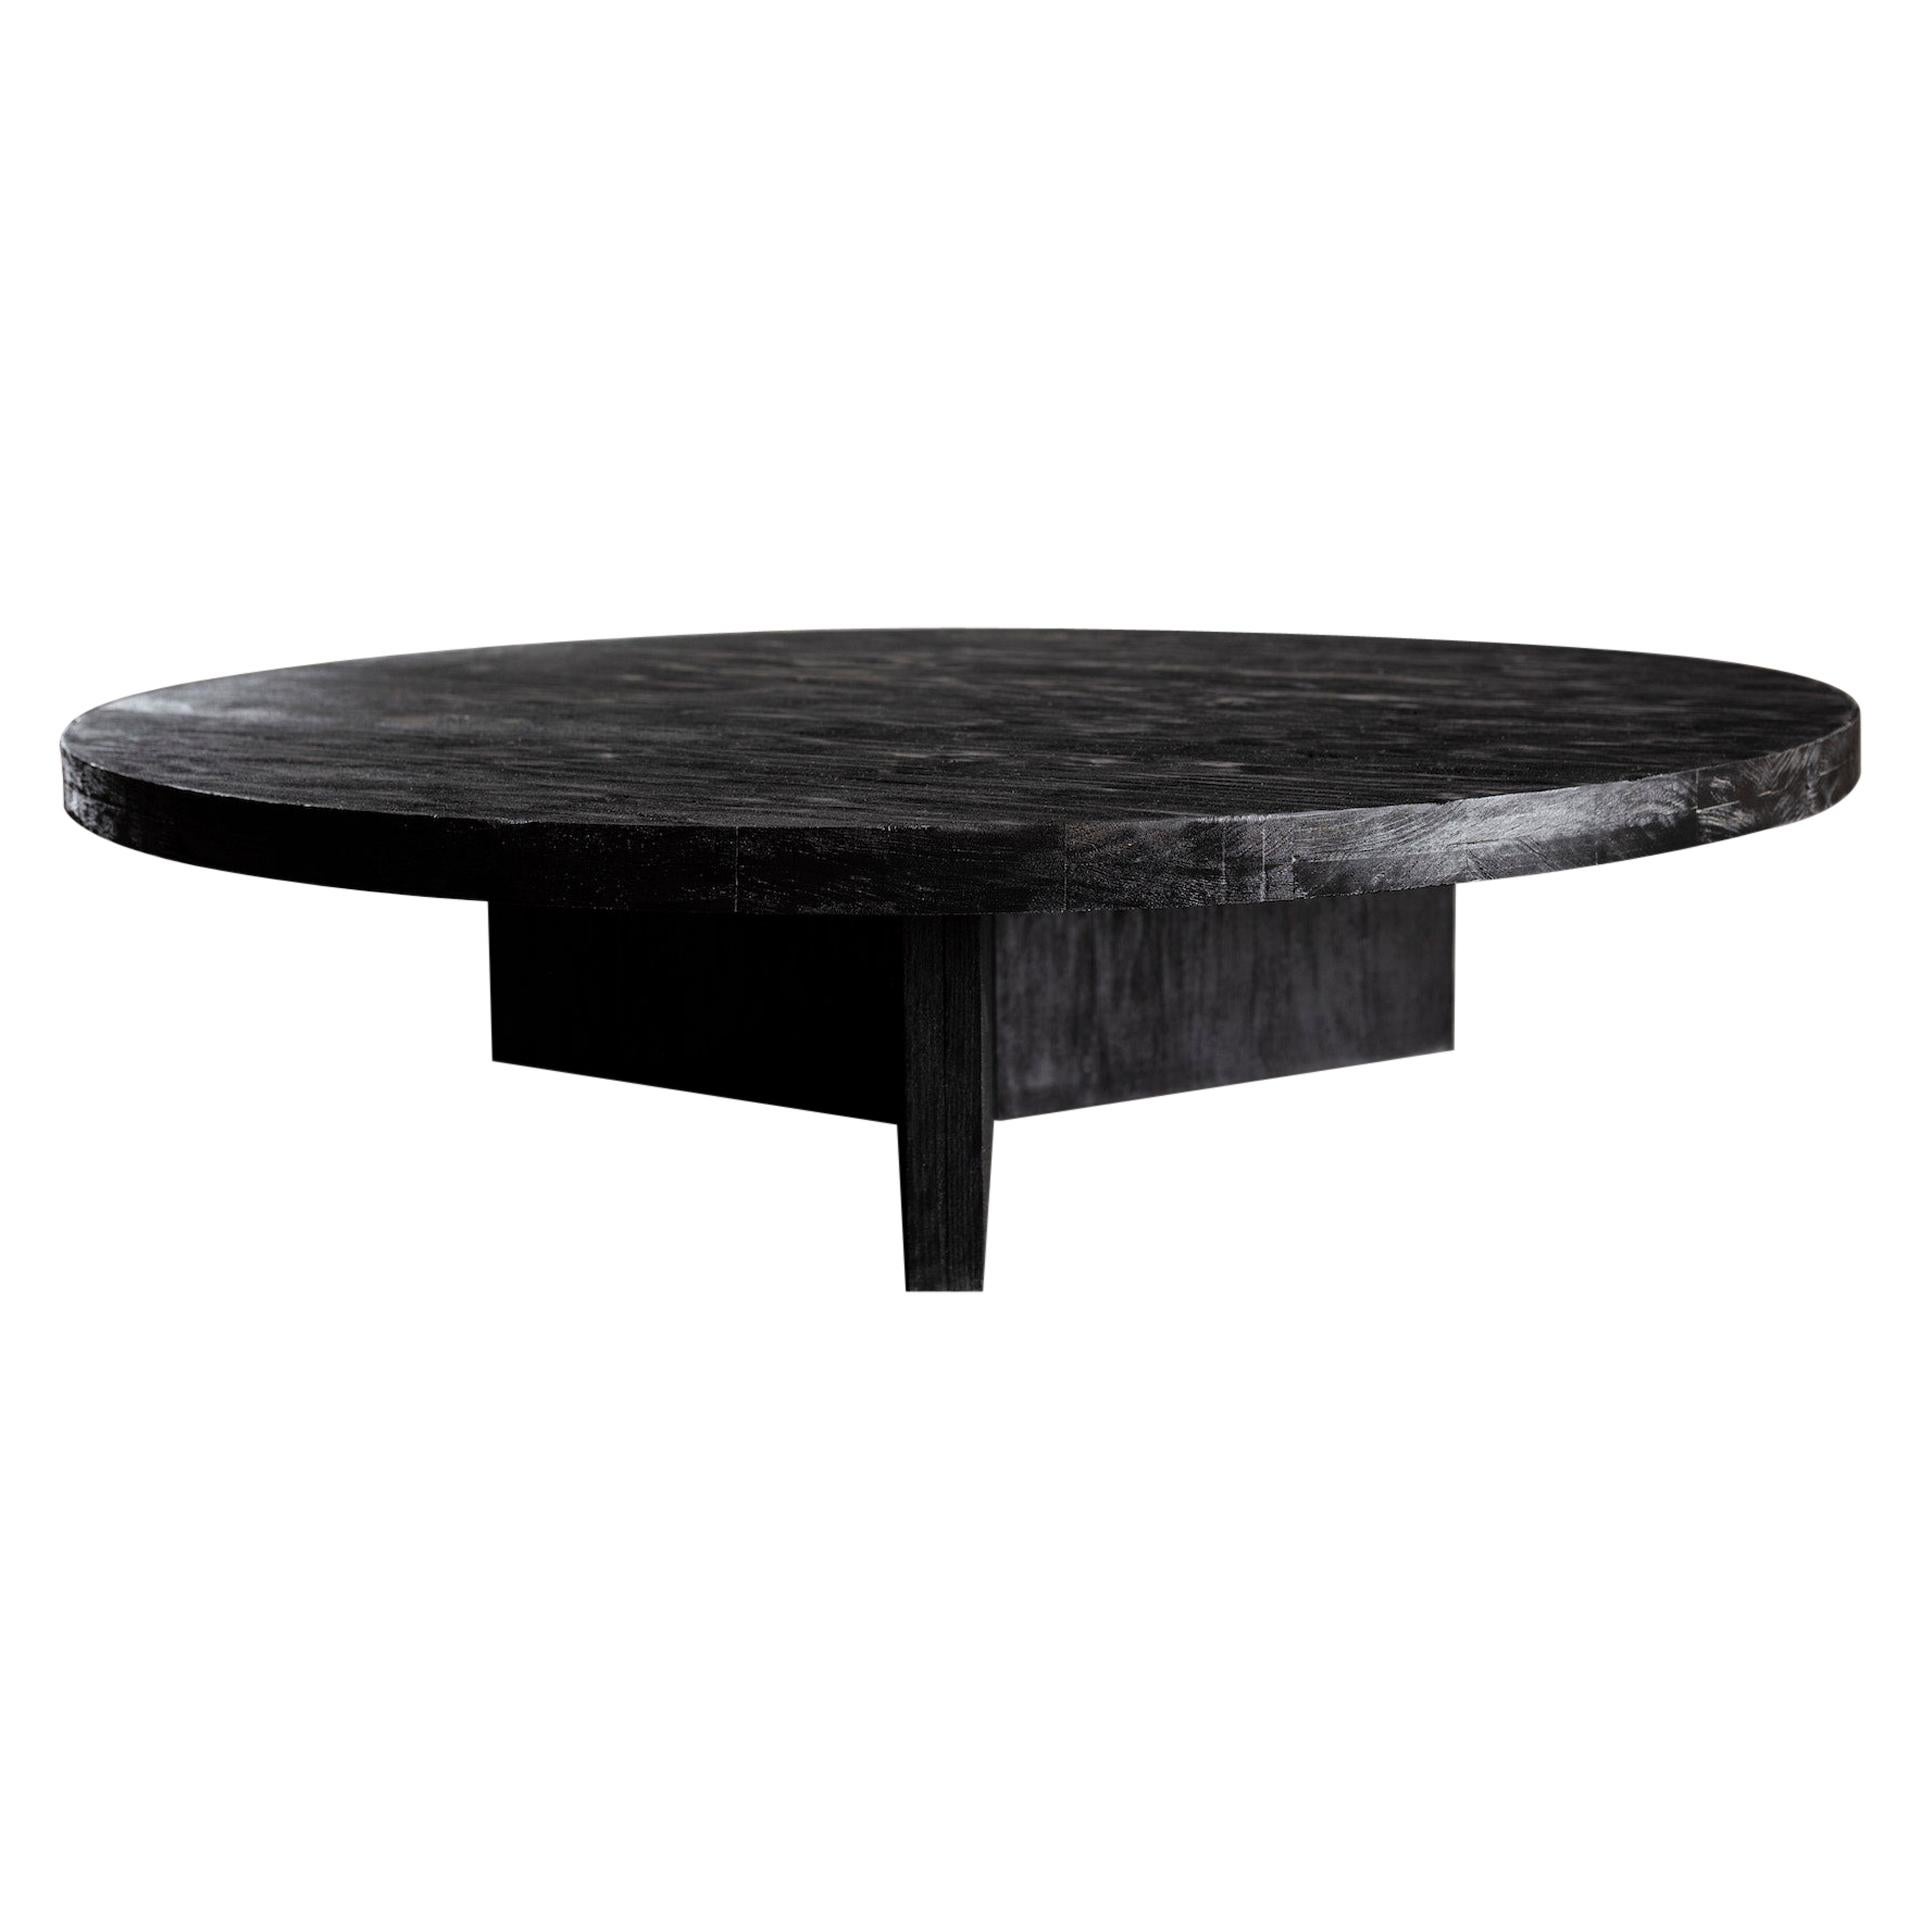 Solid Black Oak Round Coffee Table